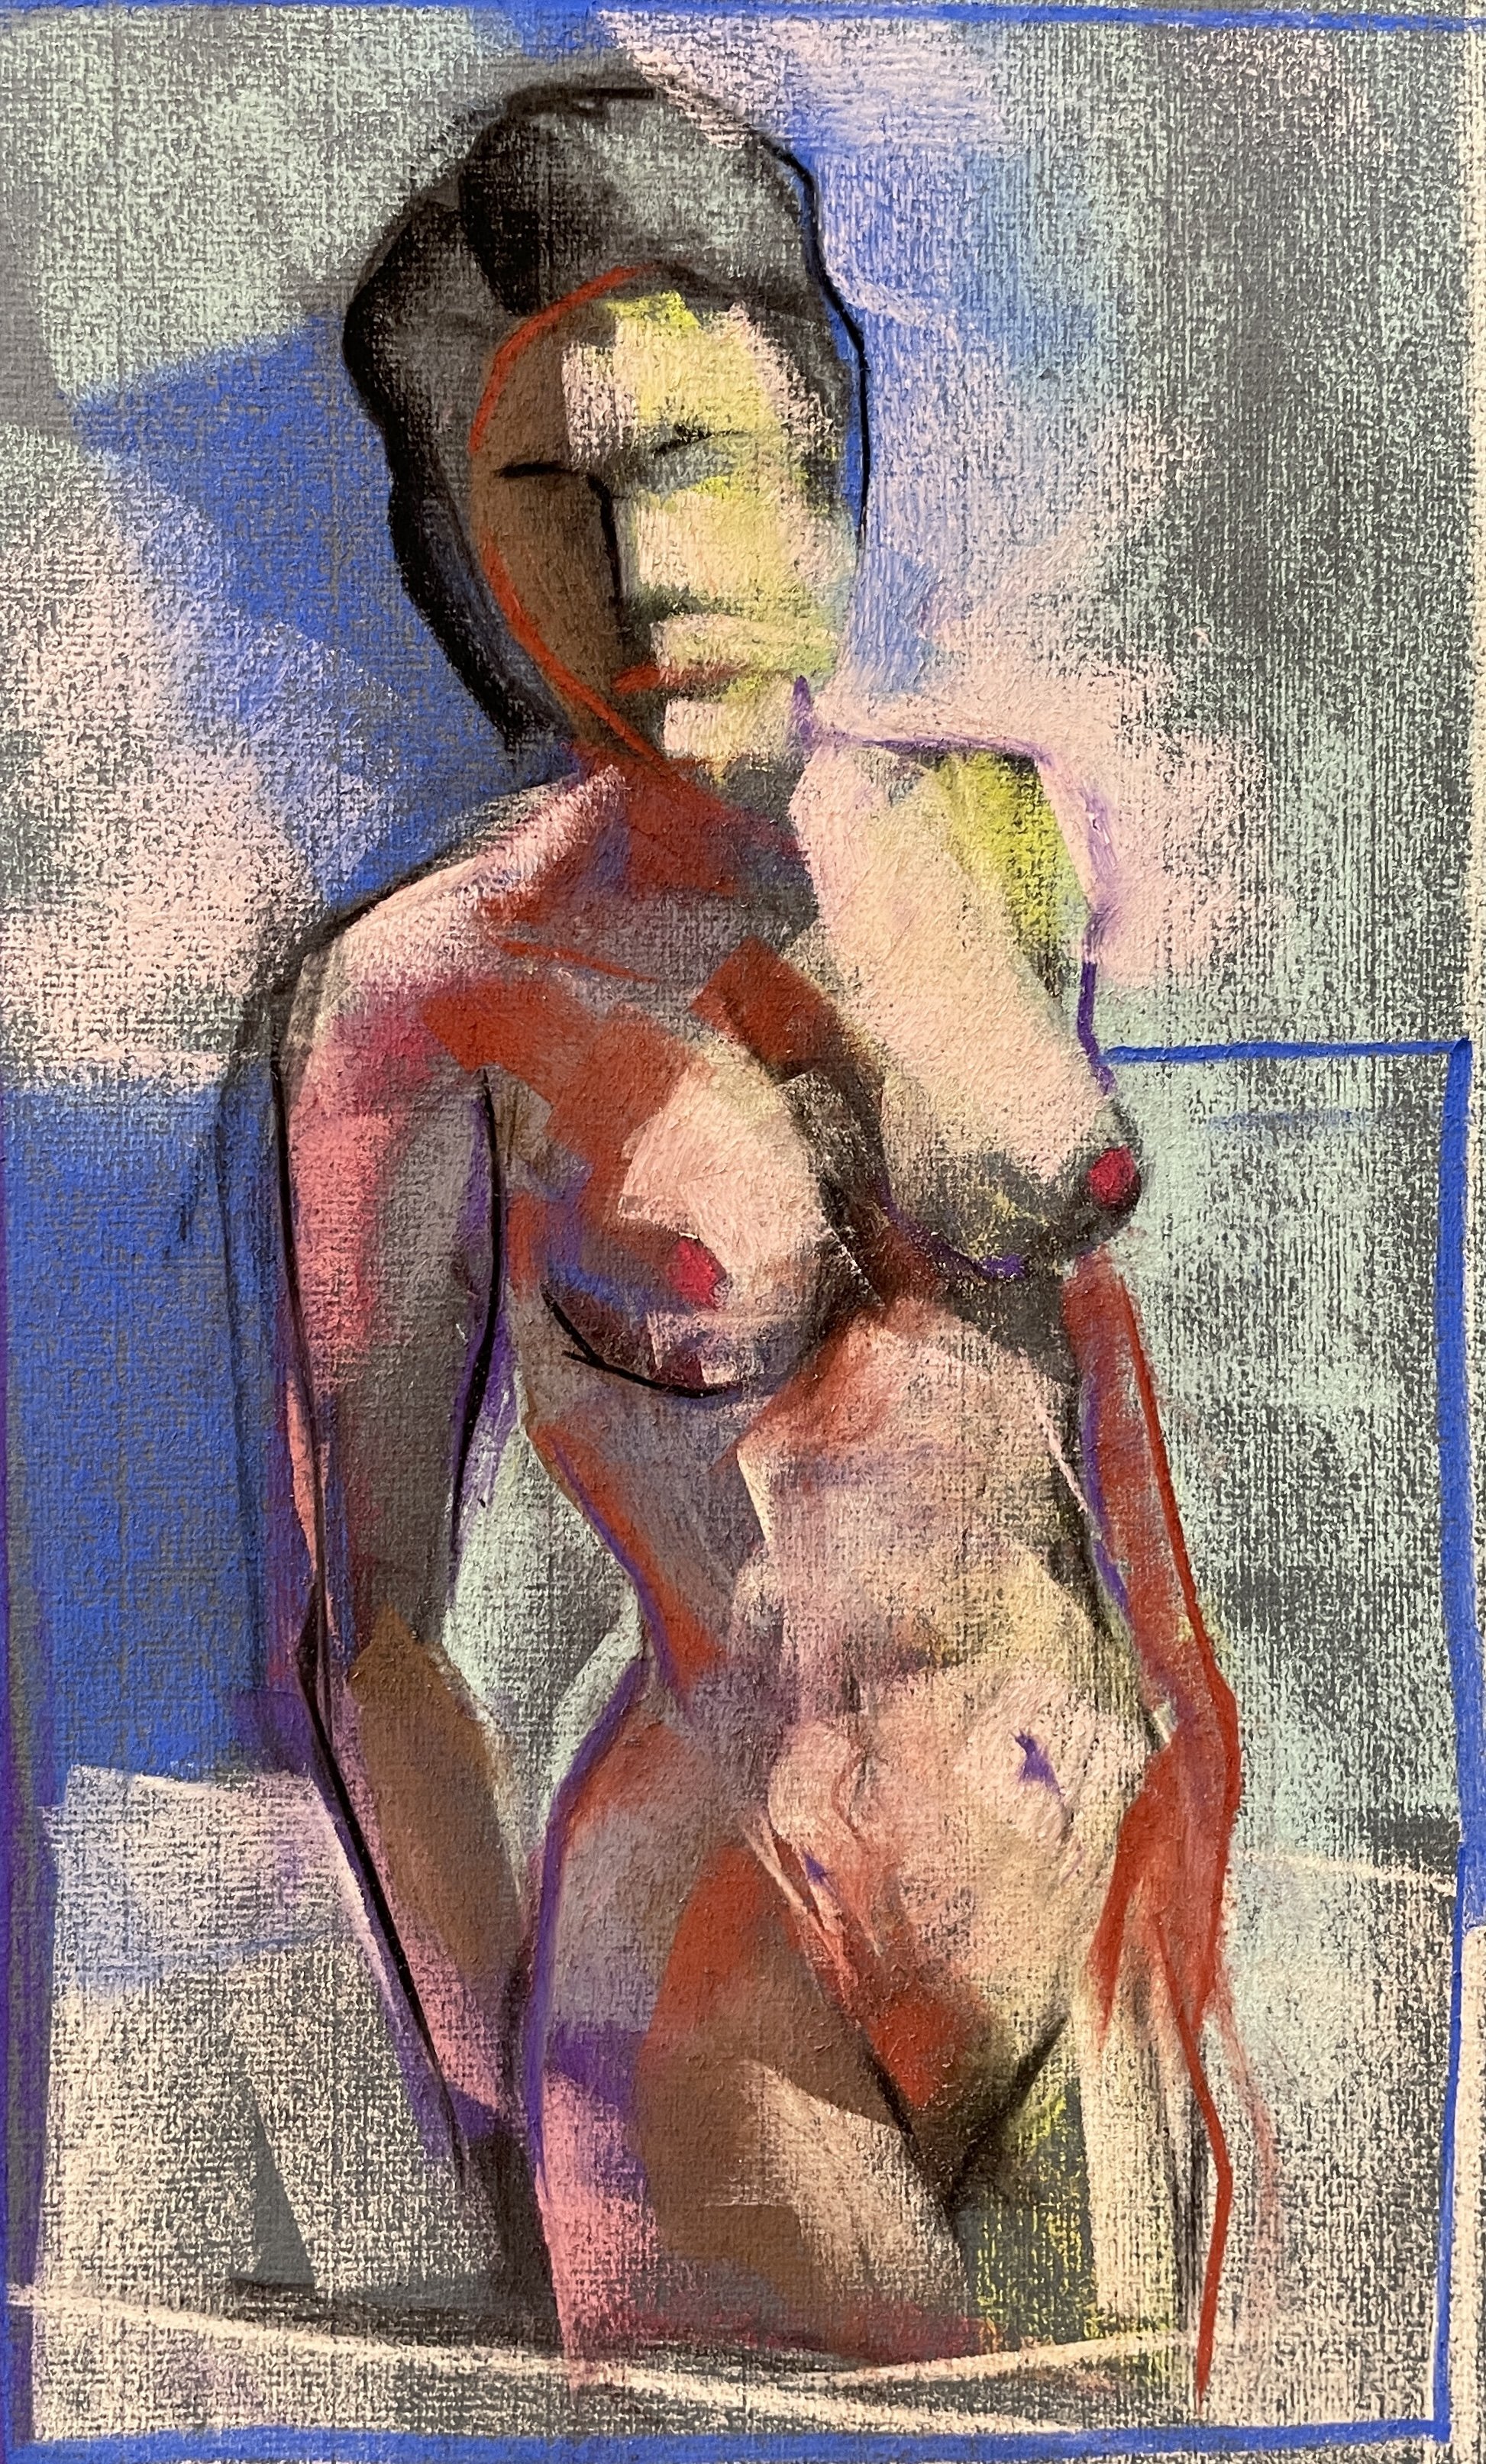 Standing Figure, 11 by 15 inches, 2022.